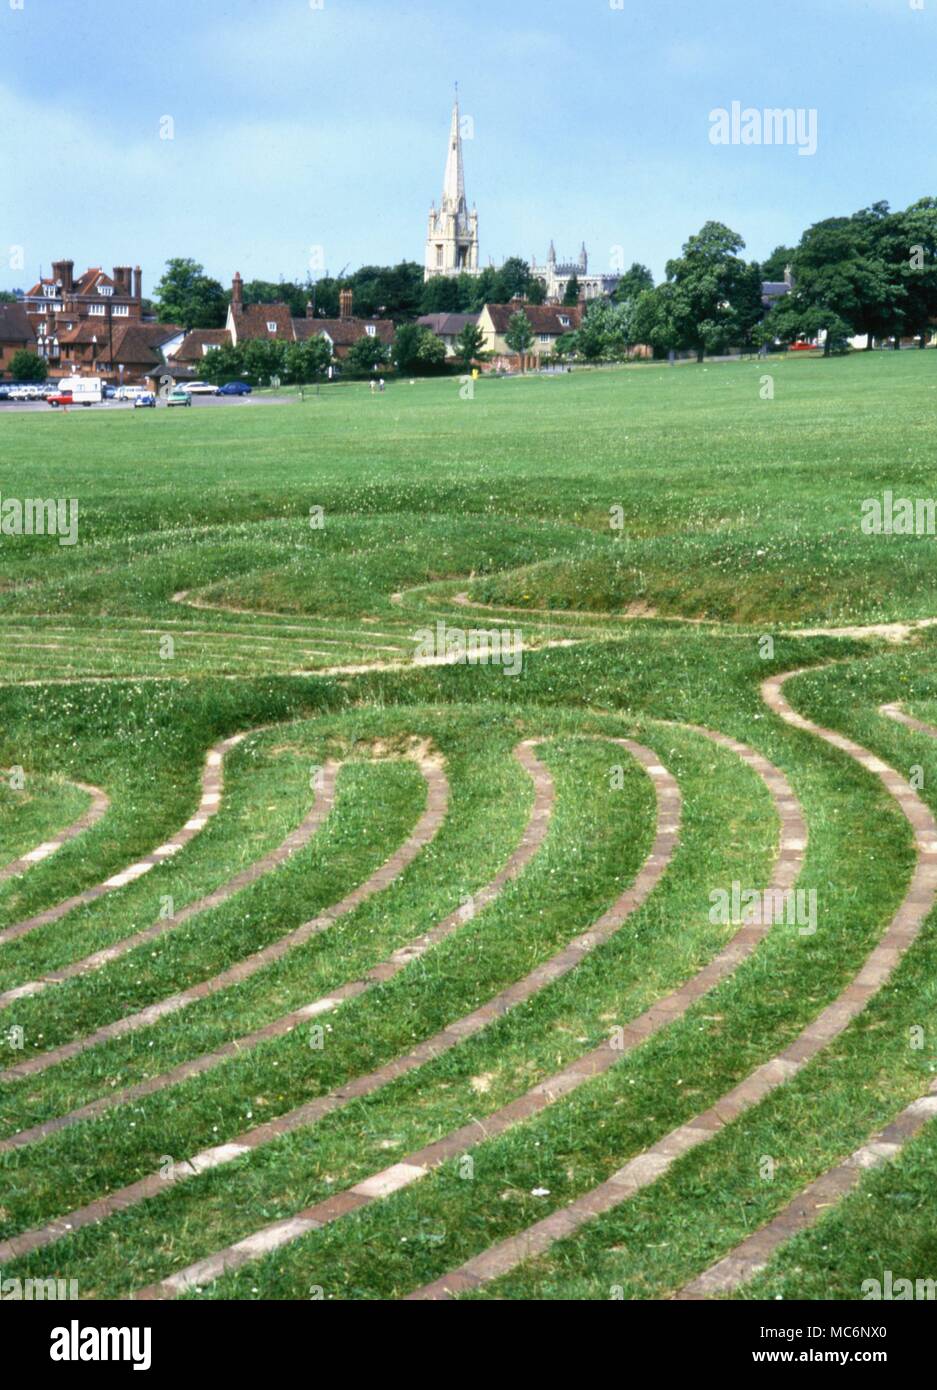 Mazes - Saffron Walden Turf maze on the common of Saffron Walden, said to be the largest maze in Britain. It is 115 feet in diameter and the pathway is almost a mile in length. Date unknown, but records for upkeep go back to 17th century . Stock Photo